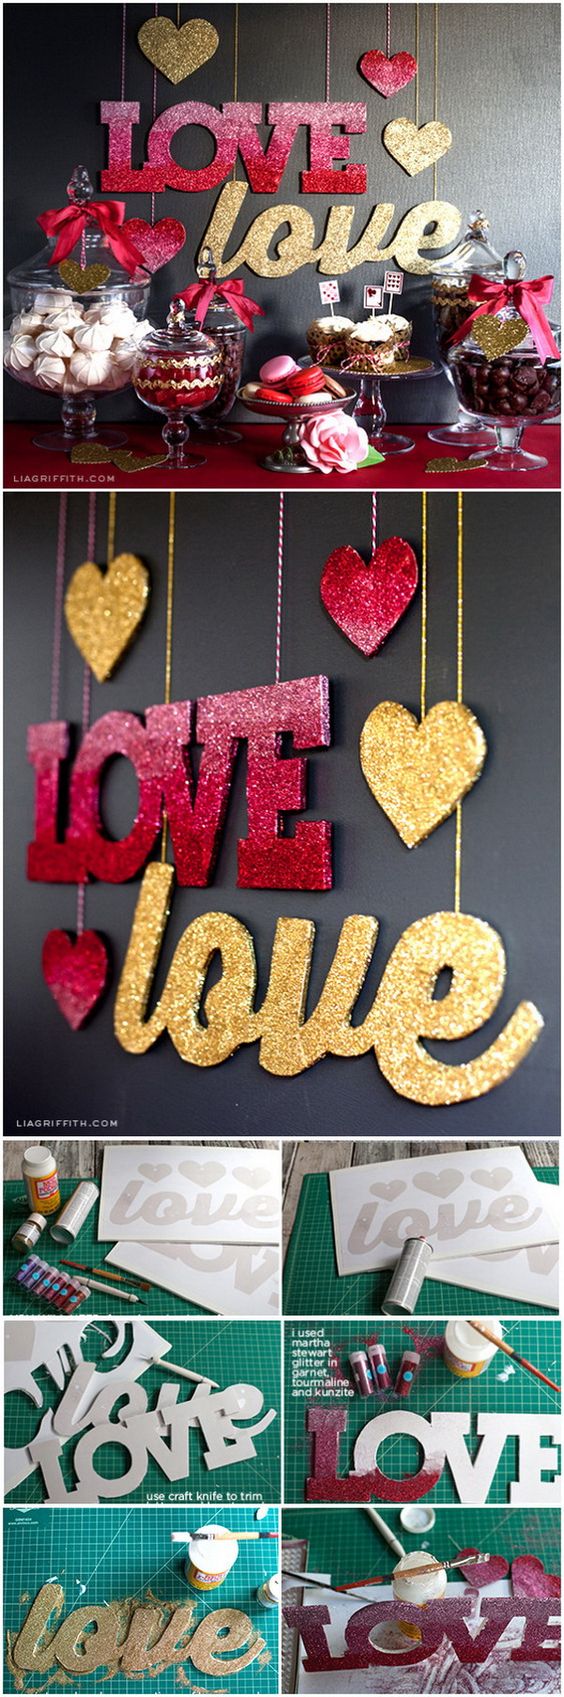 DIY Love Banners in Pink Ombré and Gold Glitter. 